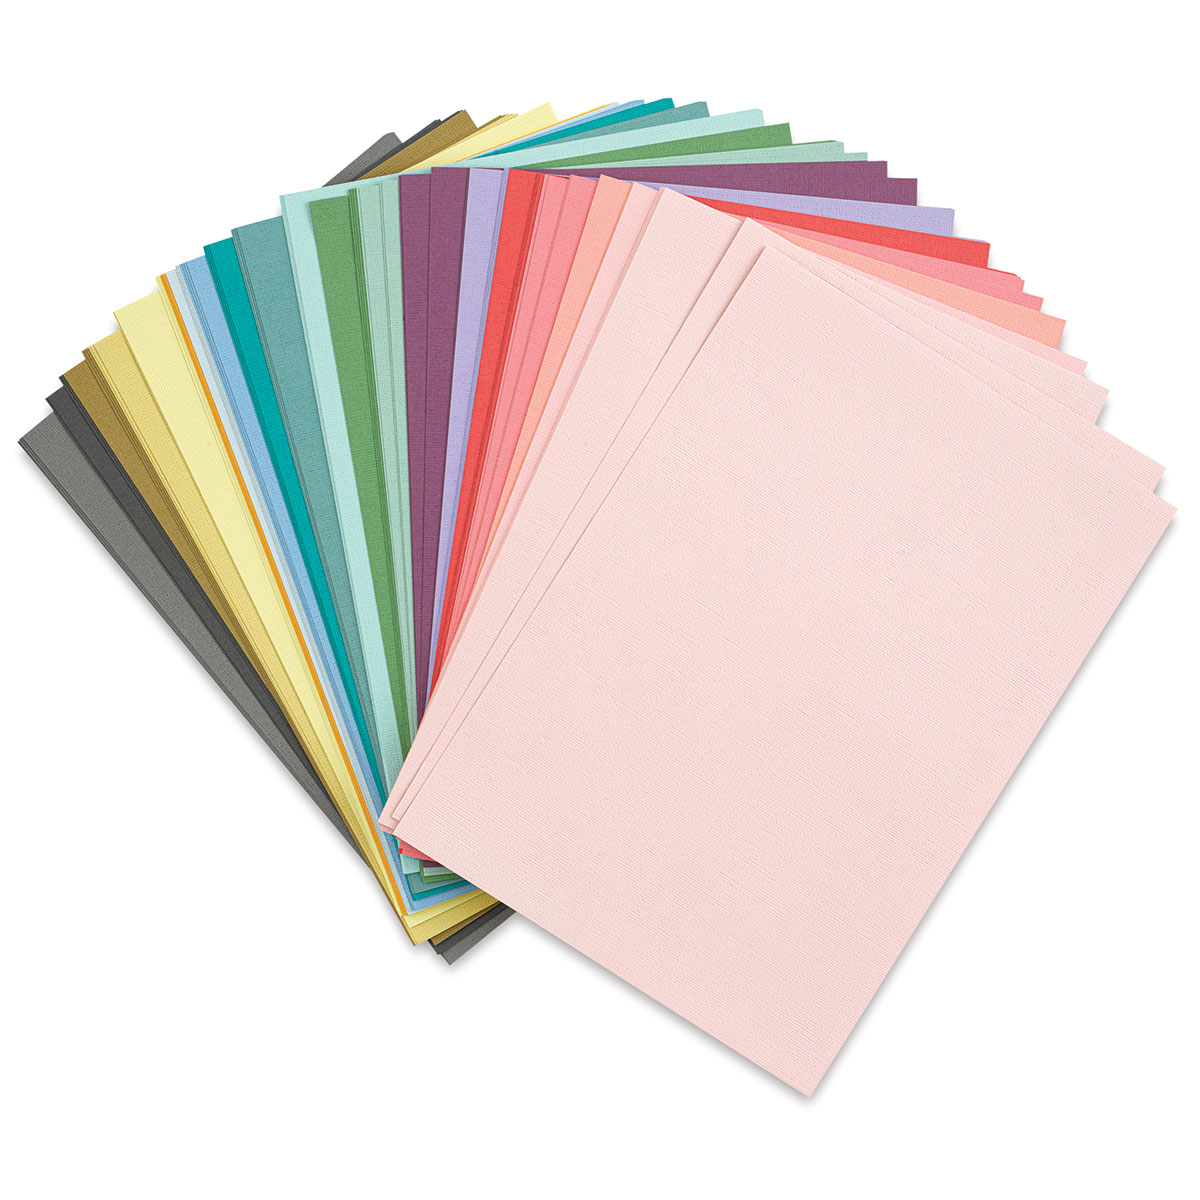 White Card Stock Paper, 8.5 x 11 -Office-School Supplies, Art Projects (5  Pack)